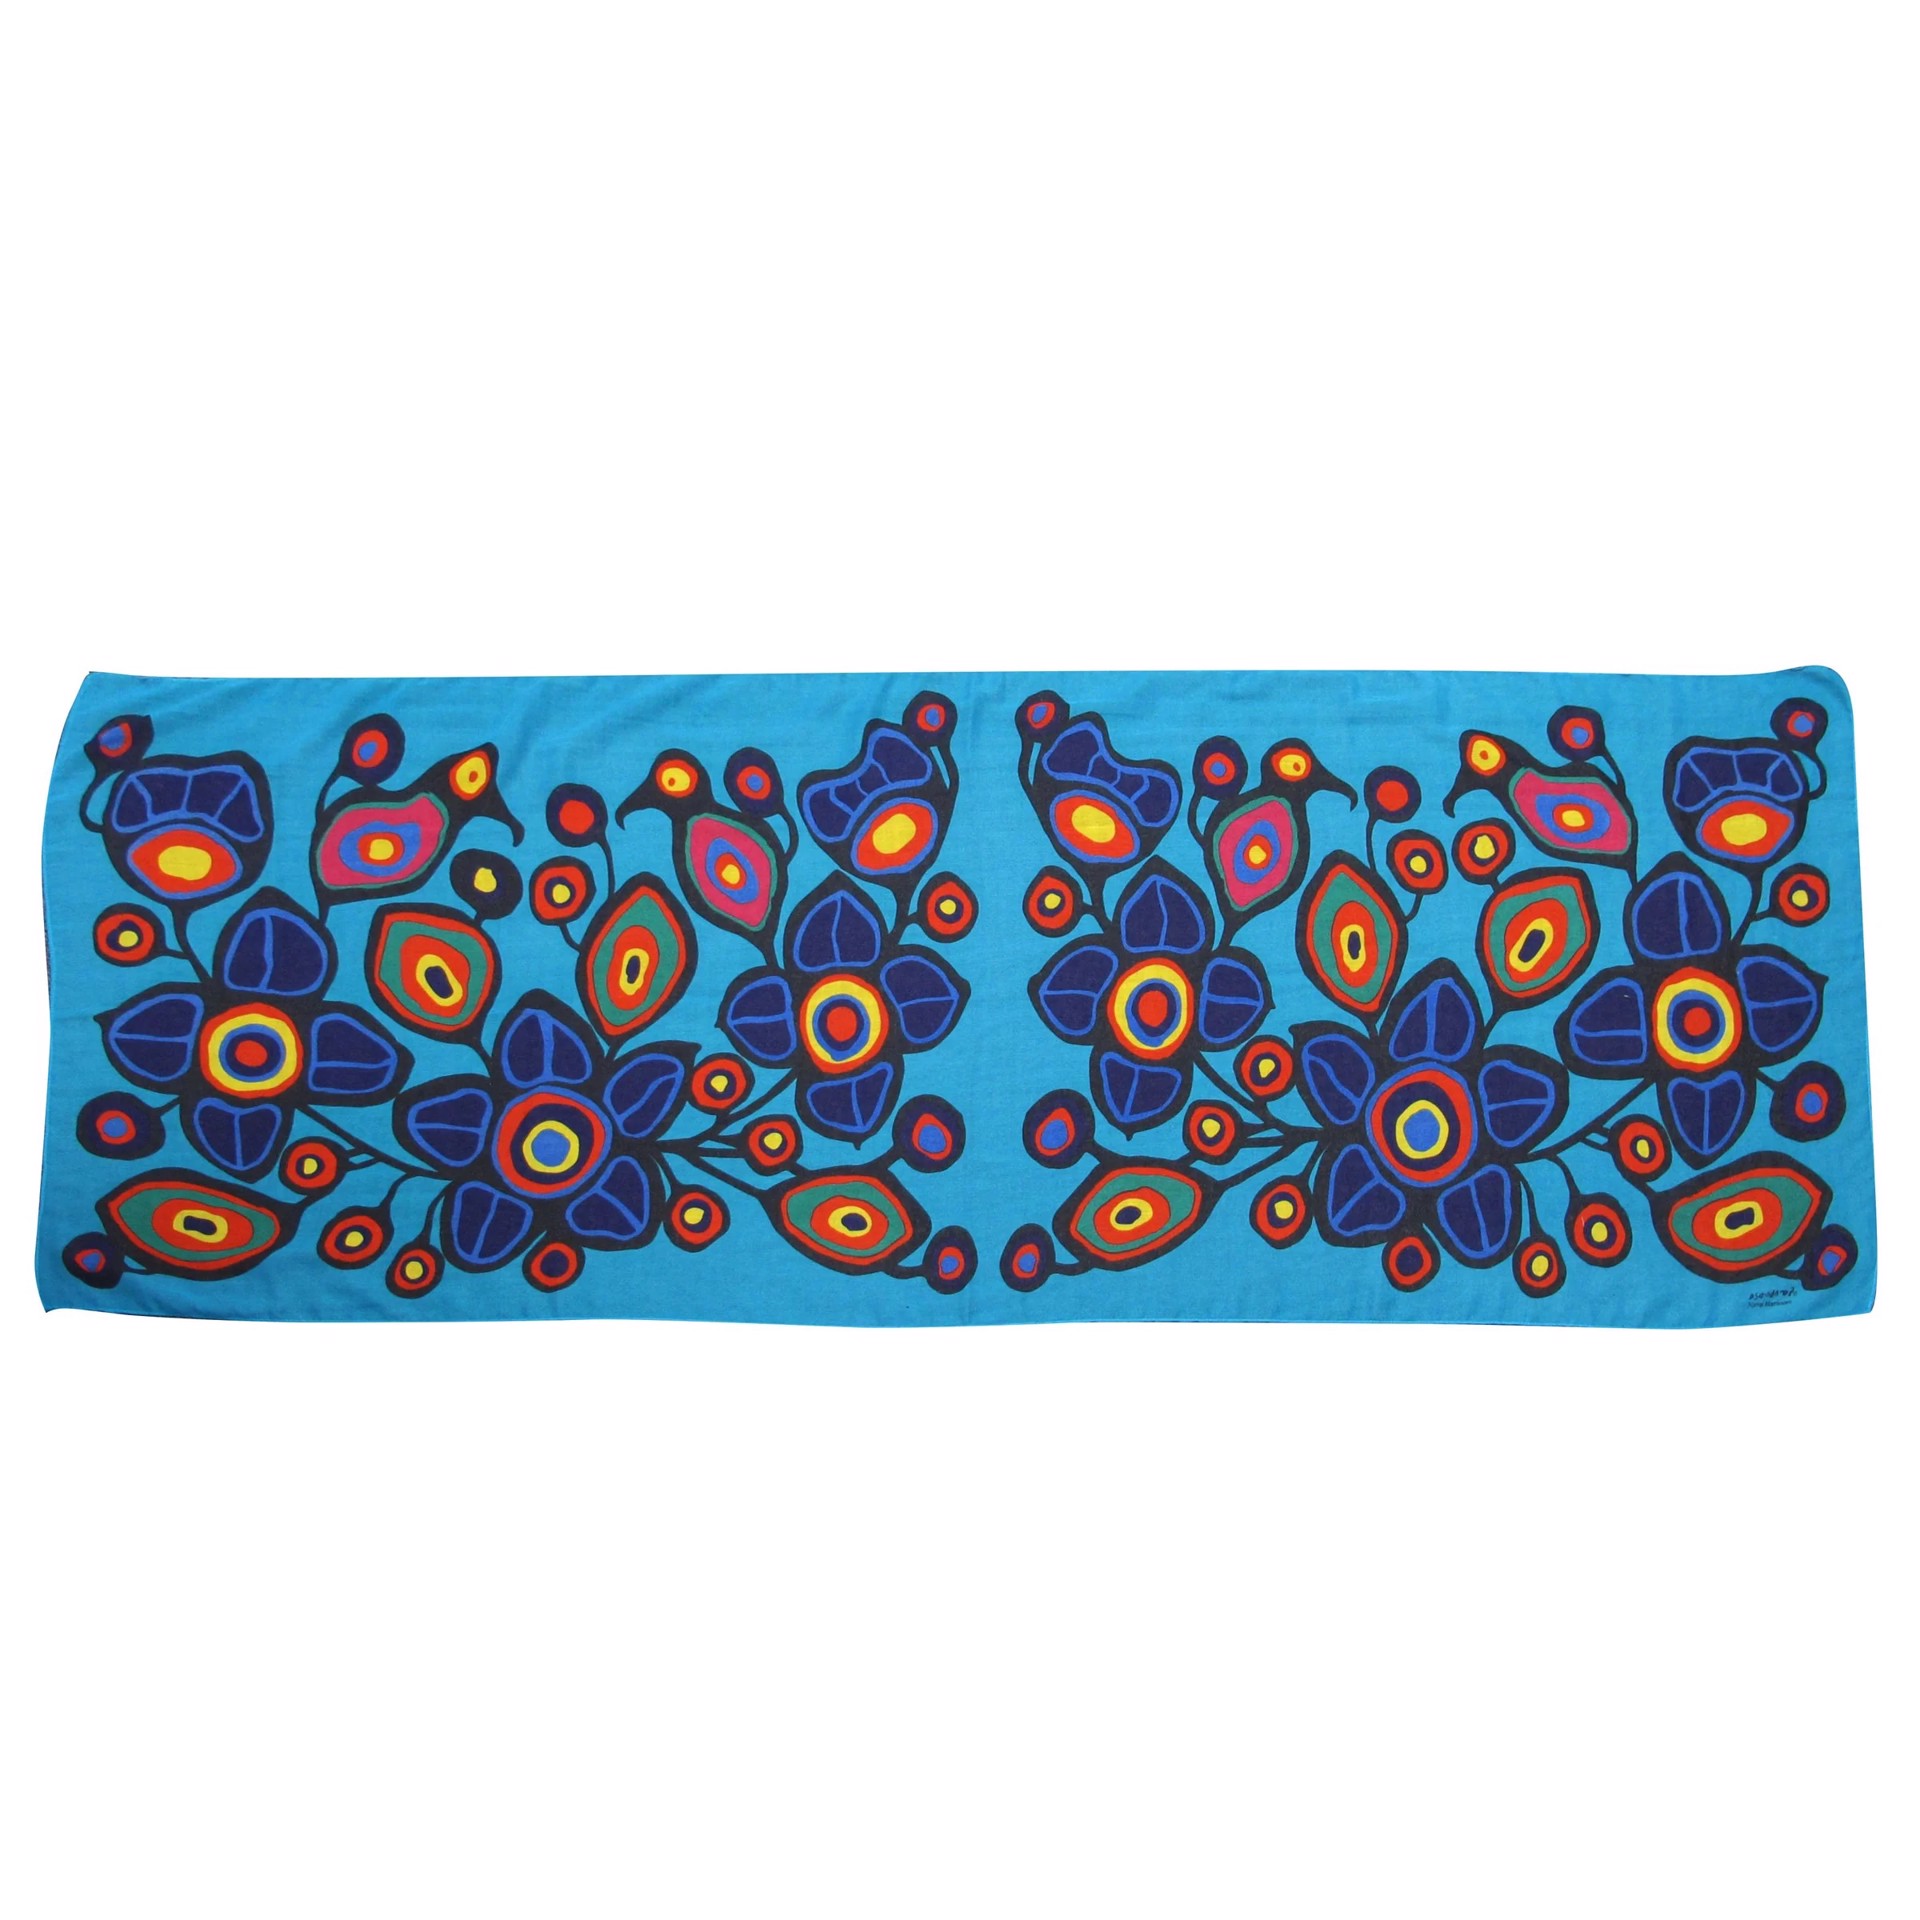 Flowers and Birds Artist Scarf by Norval Morisseau